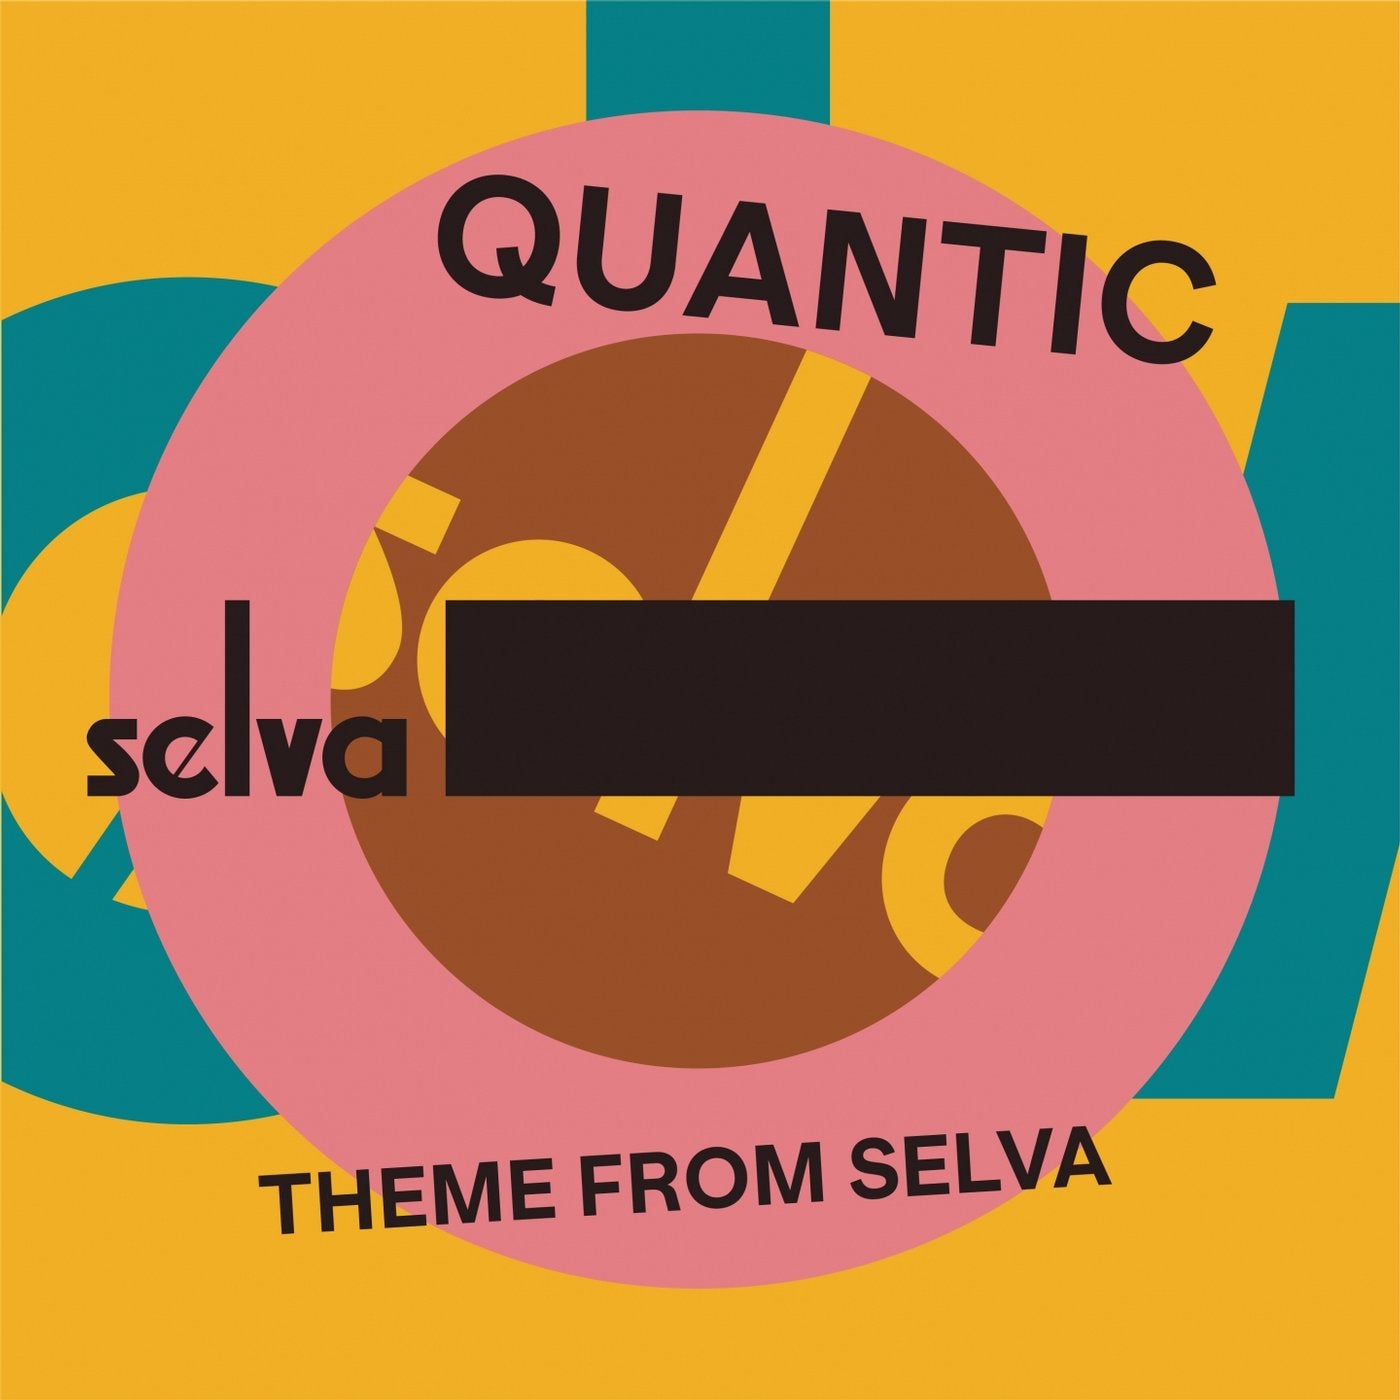 Theme from Selva